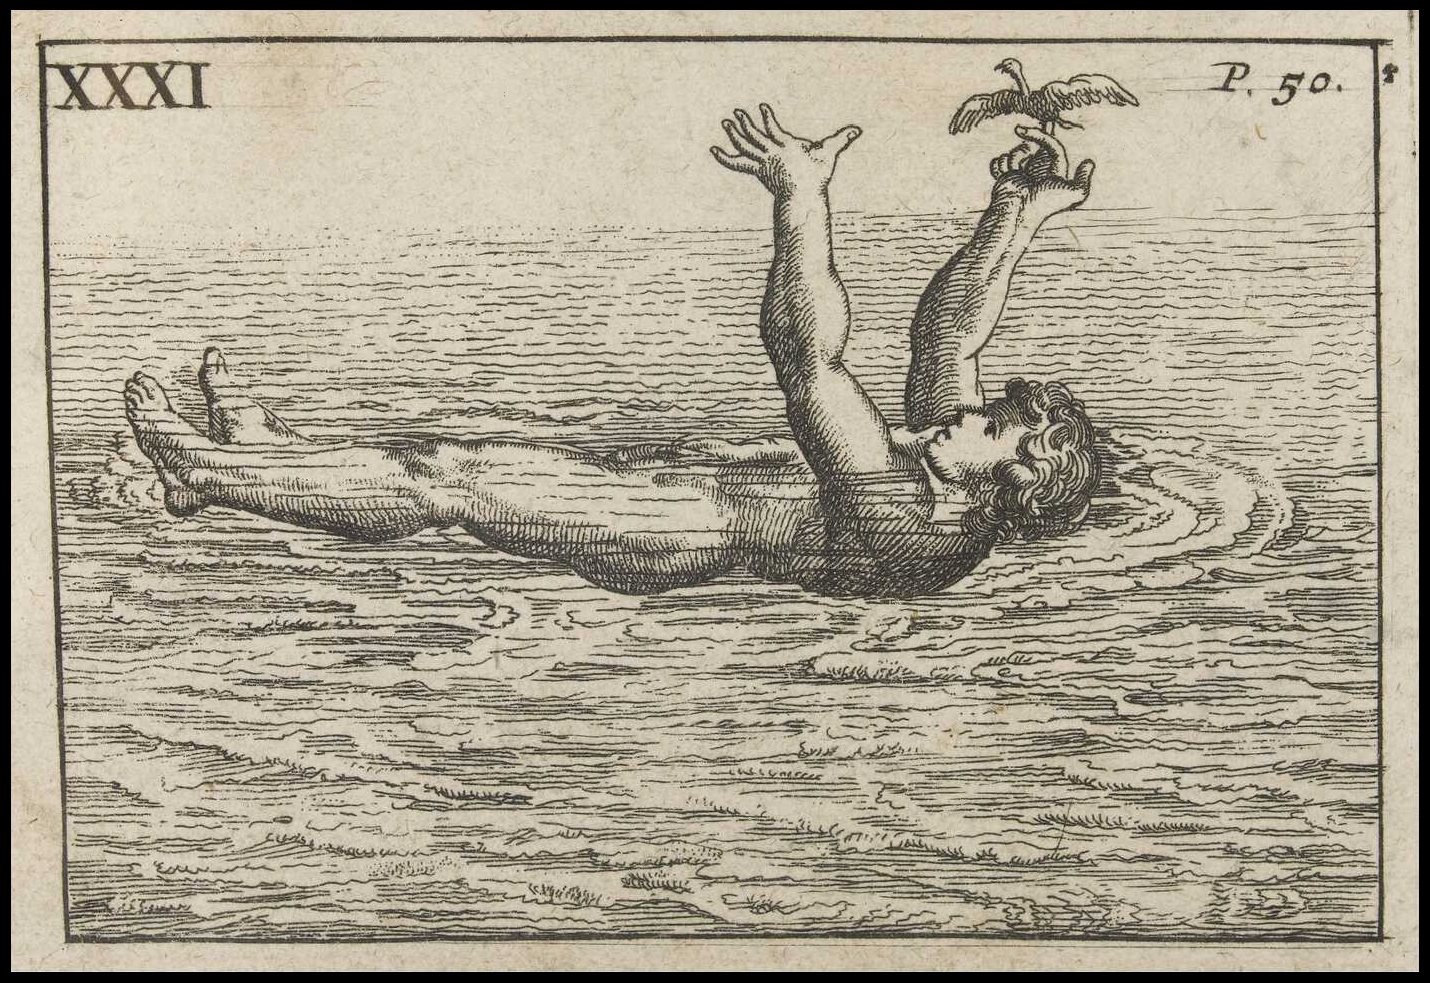 book illustration of weird swimming technique